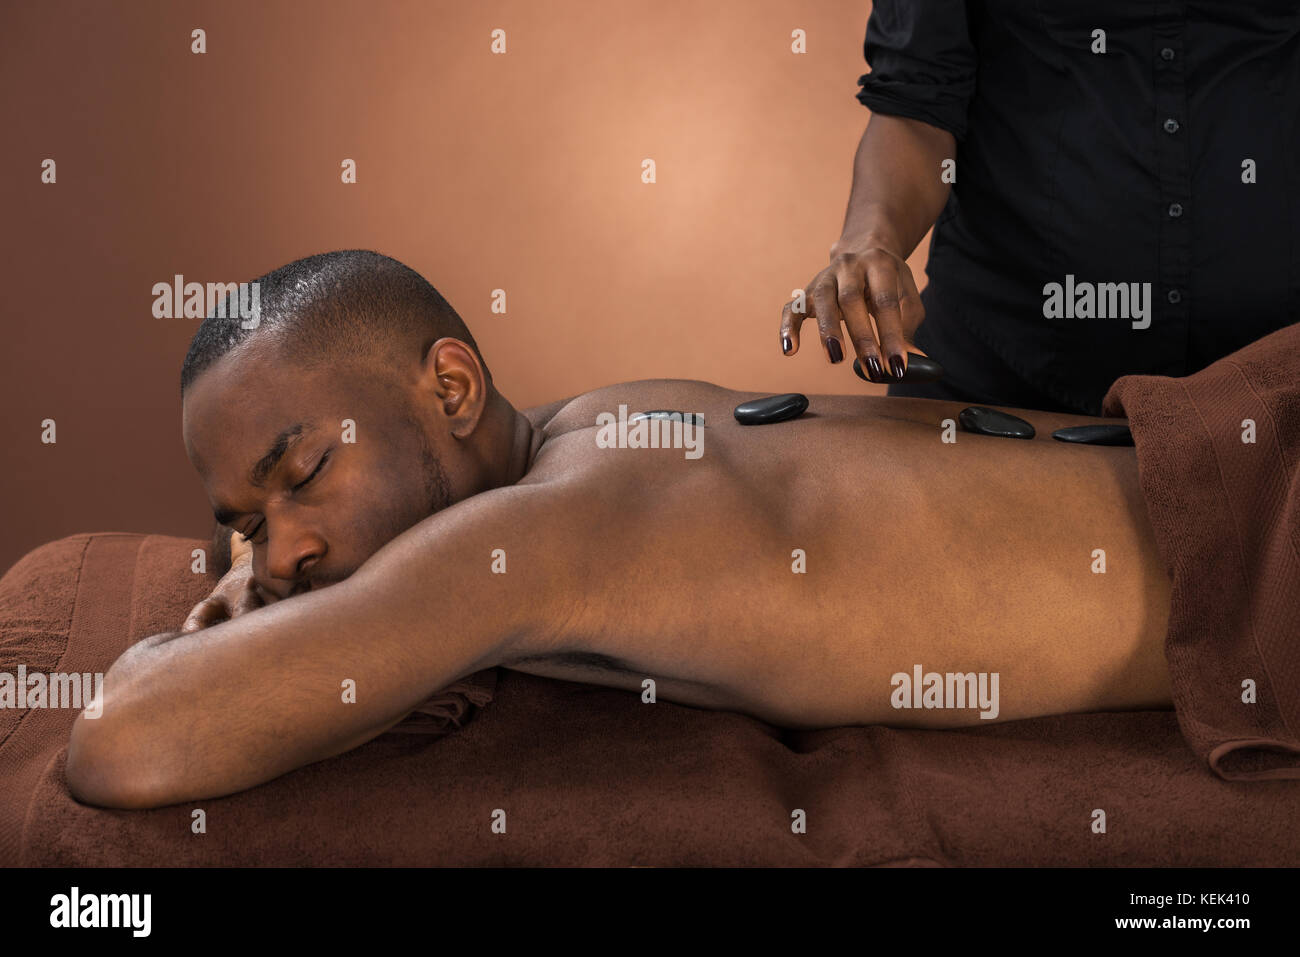 African Man Relaxing In A Spa Getting Hot Stone Therapy Stock Photo